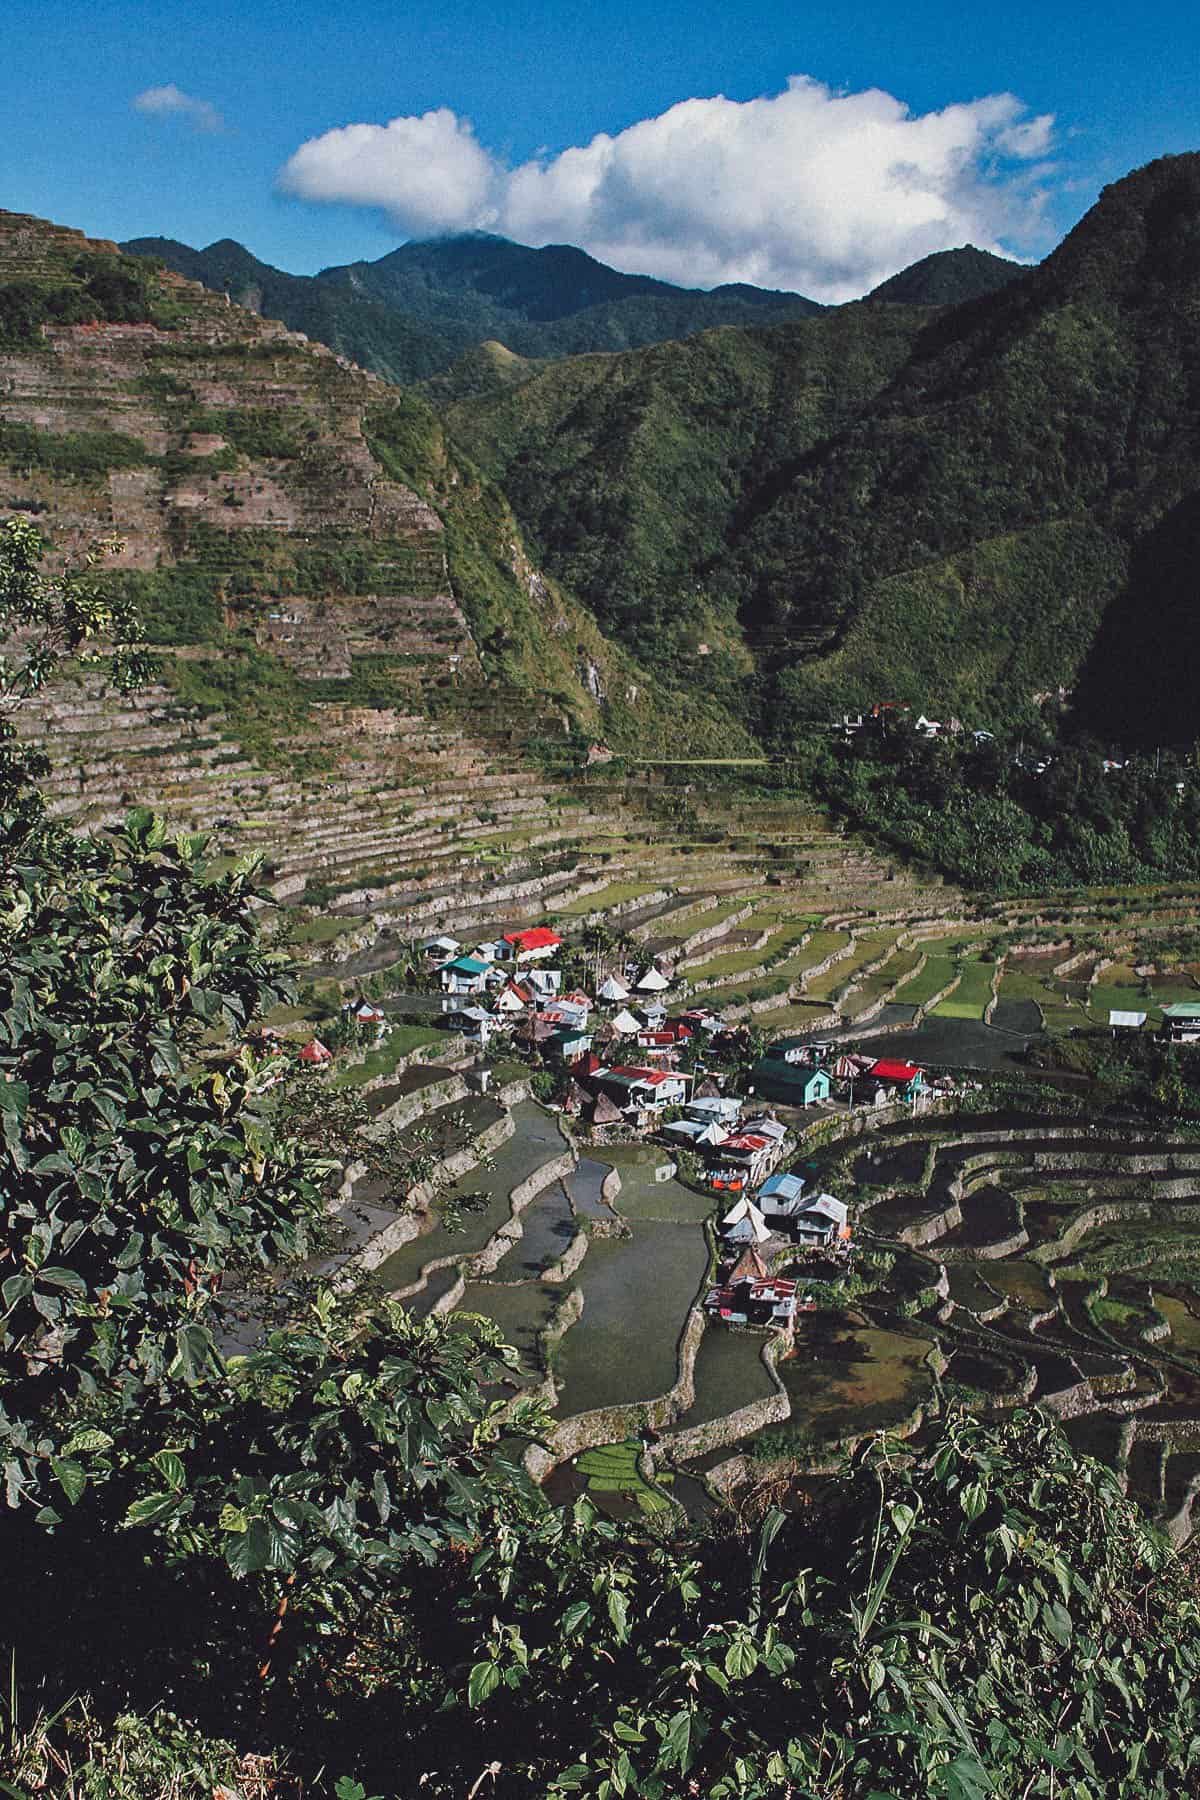 The First-Timer's Travel Guide to Batad Rice Terraces, Banaue, Ifugao